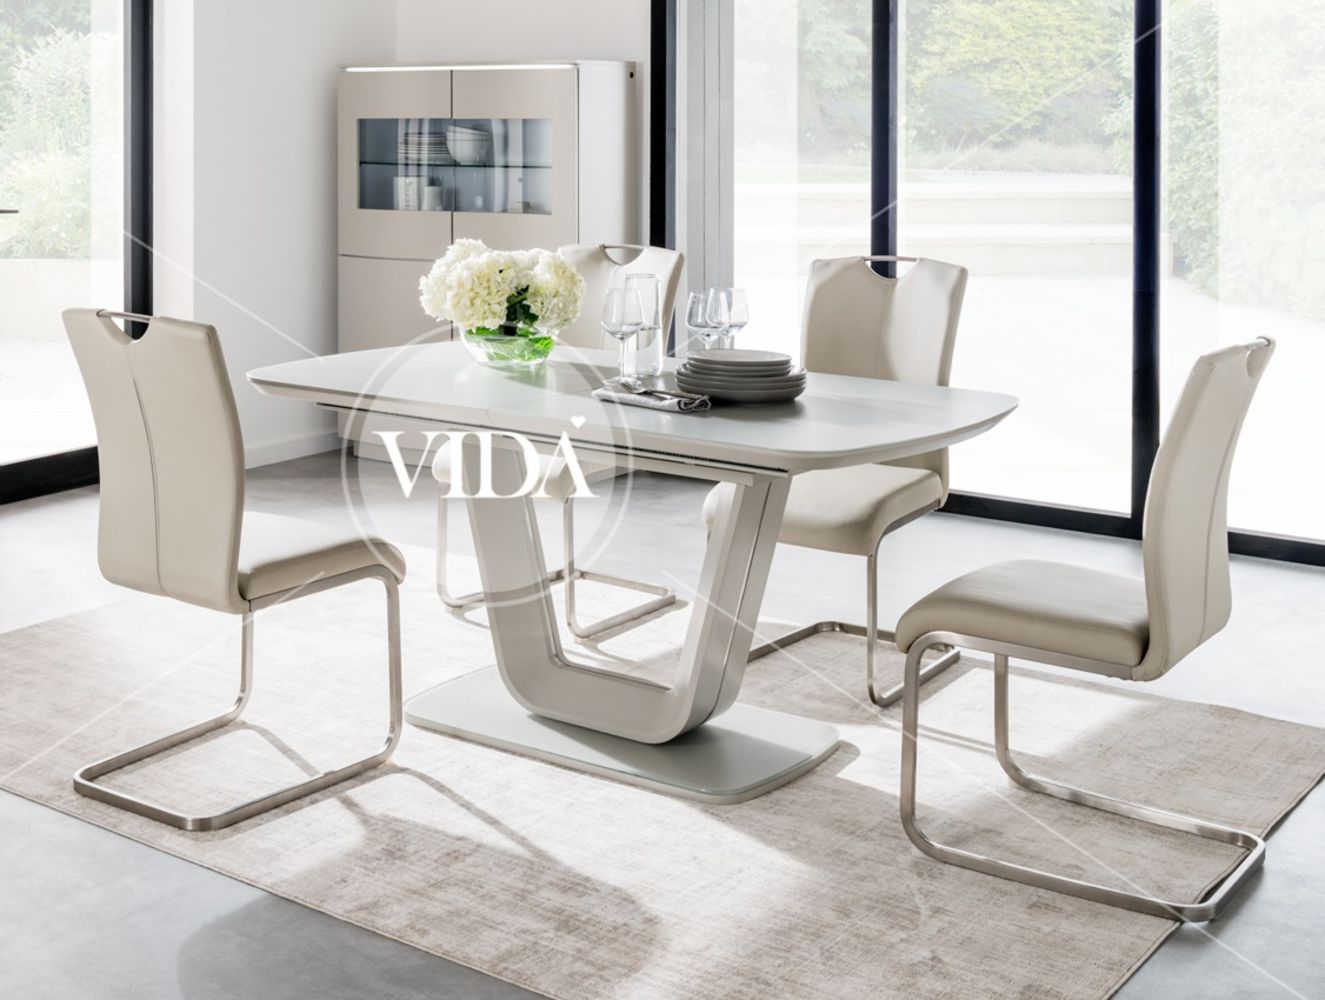 92% off retail prices, refurbished  Vida Living Sideboards and Dining tables.